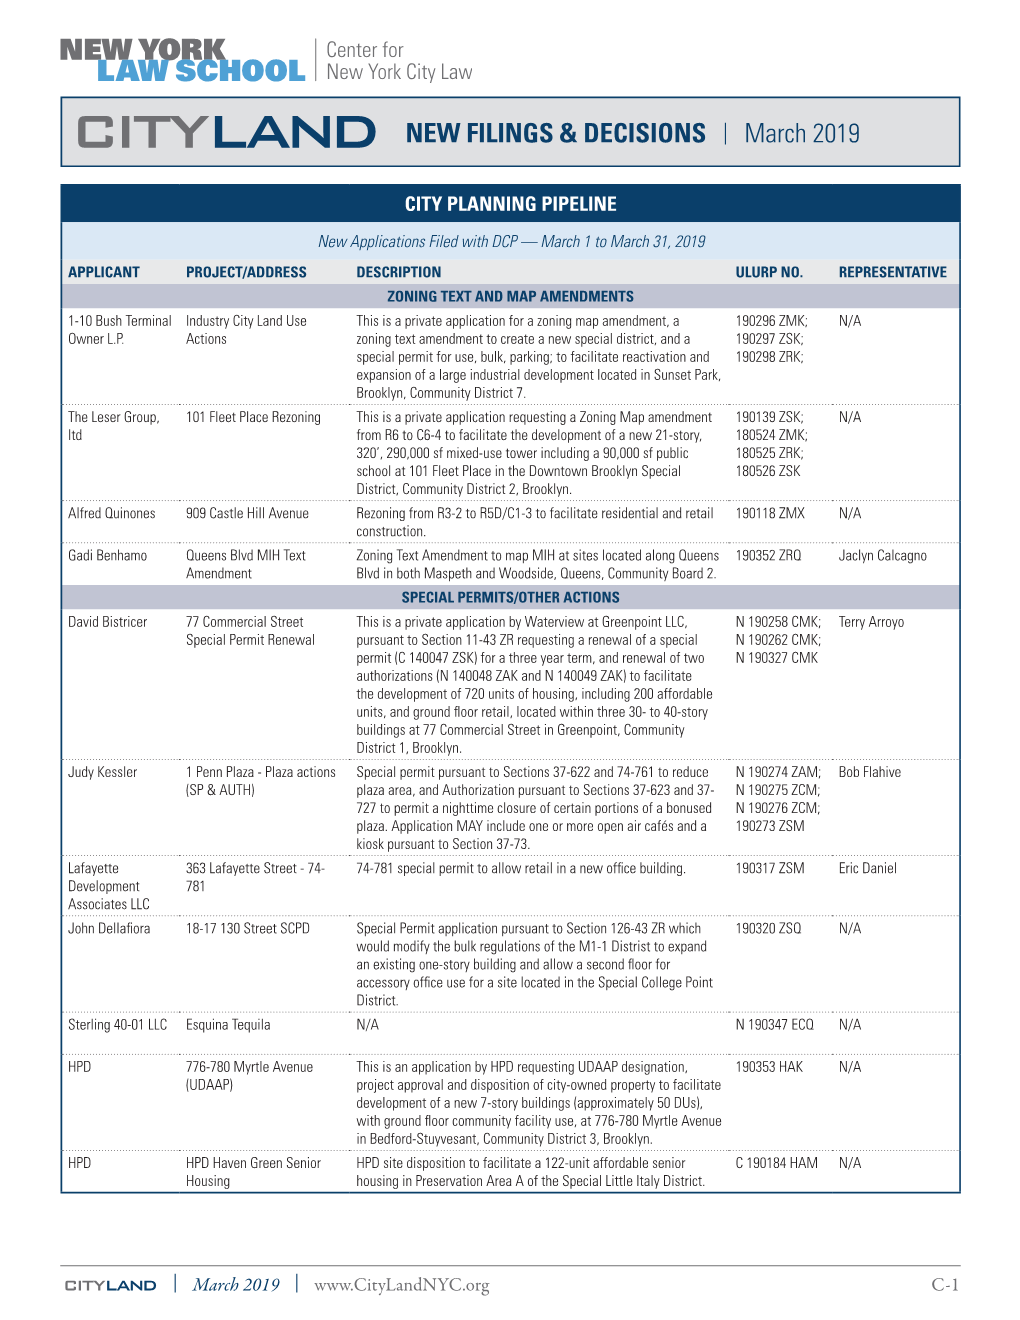 CITYLAND NEW FILINGS & DECISIONS | March 2019